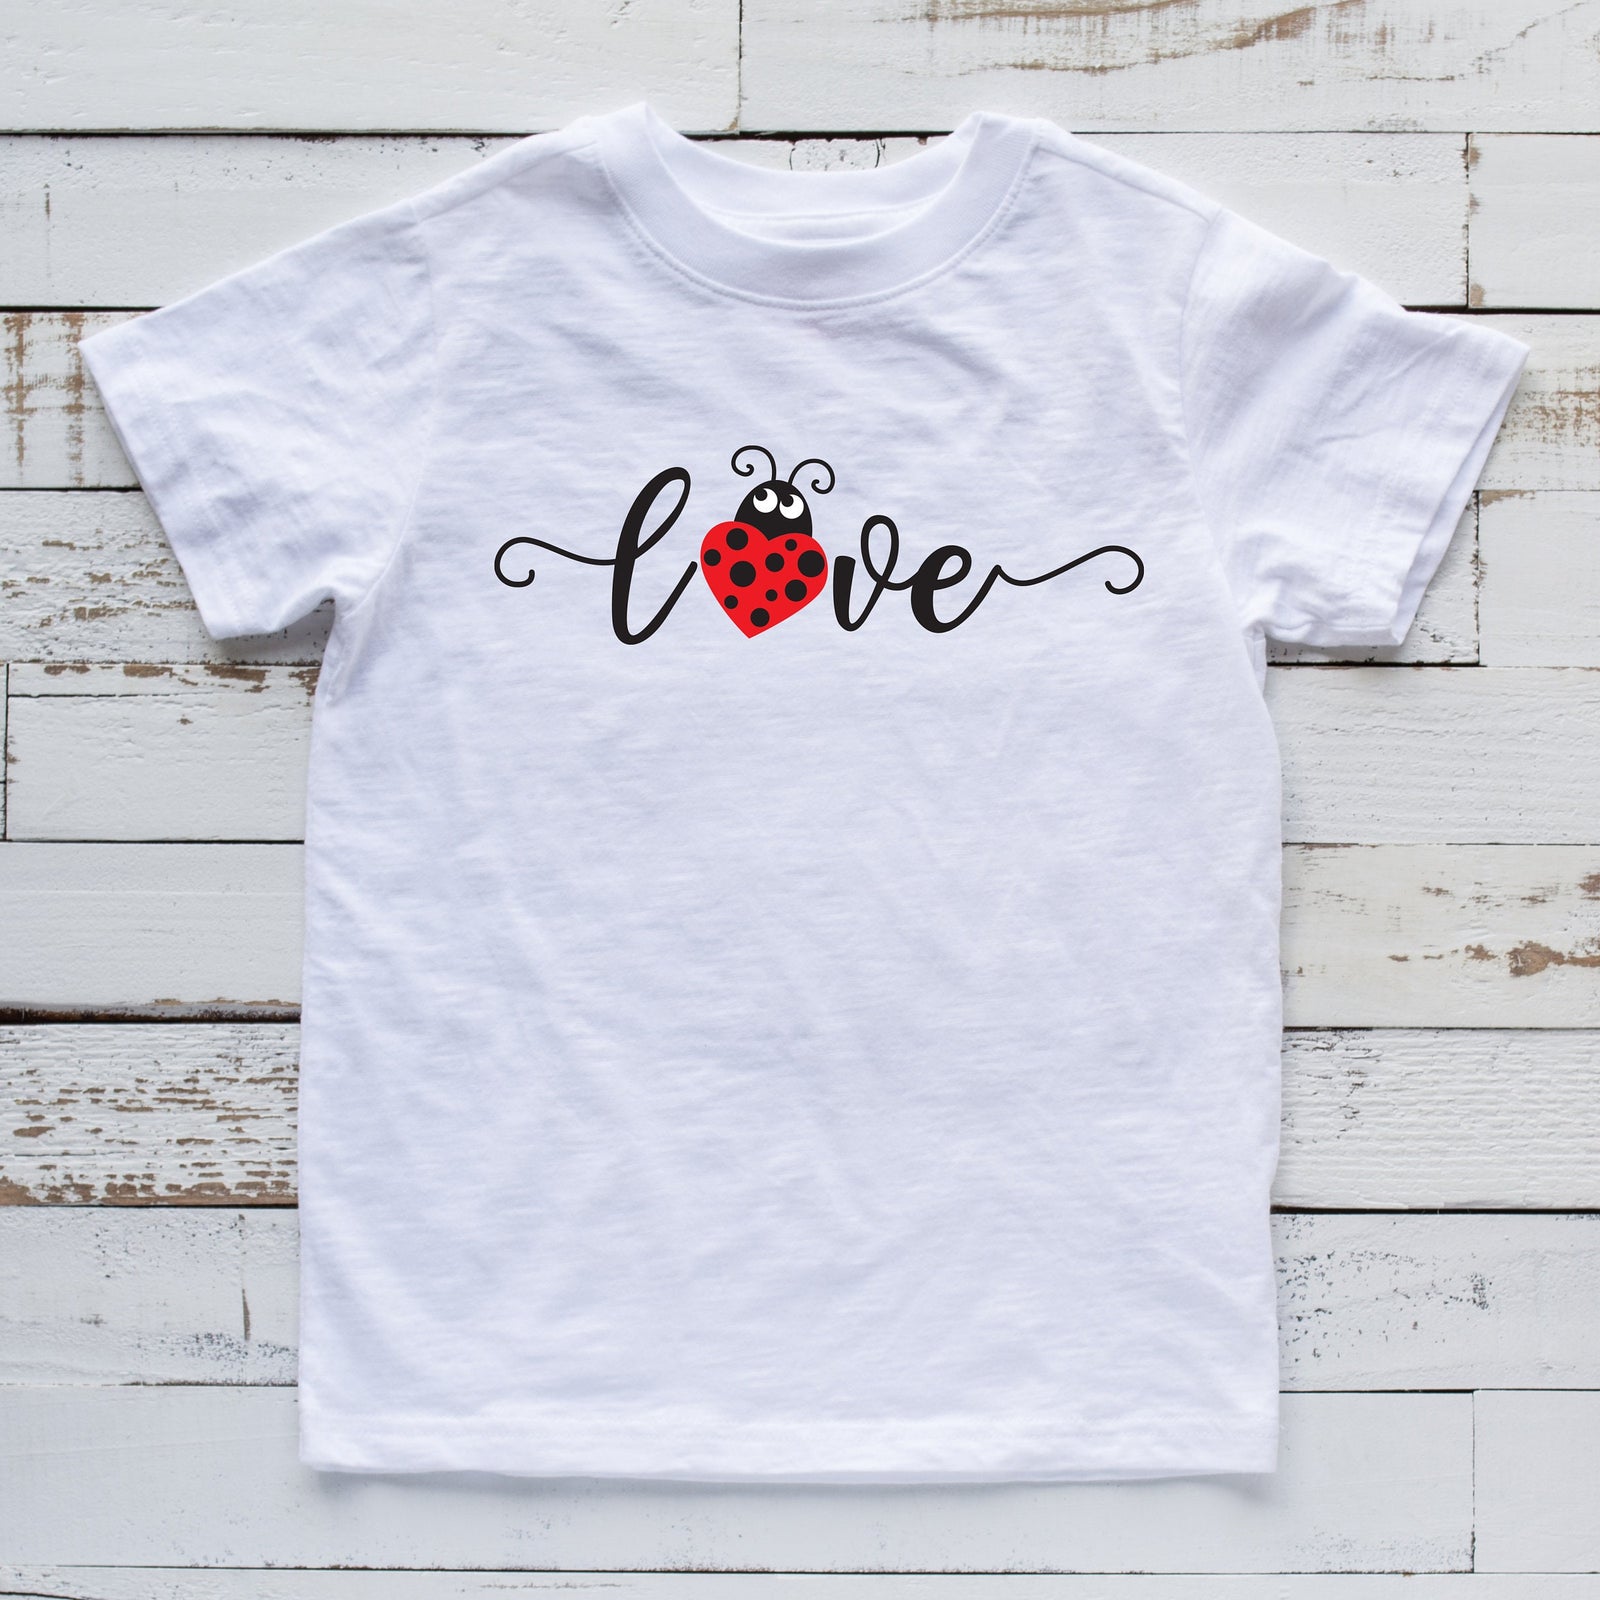 Lady Bug Love T Shirt - My First Valentine's Day T Shirt - Love T Shirt - Heart Breaker - Infant Toddler Boy or Girl